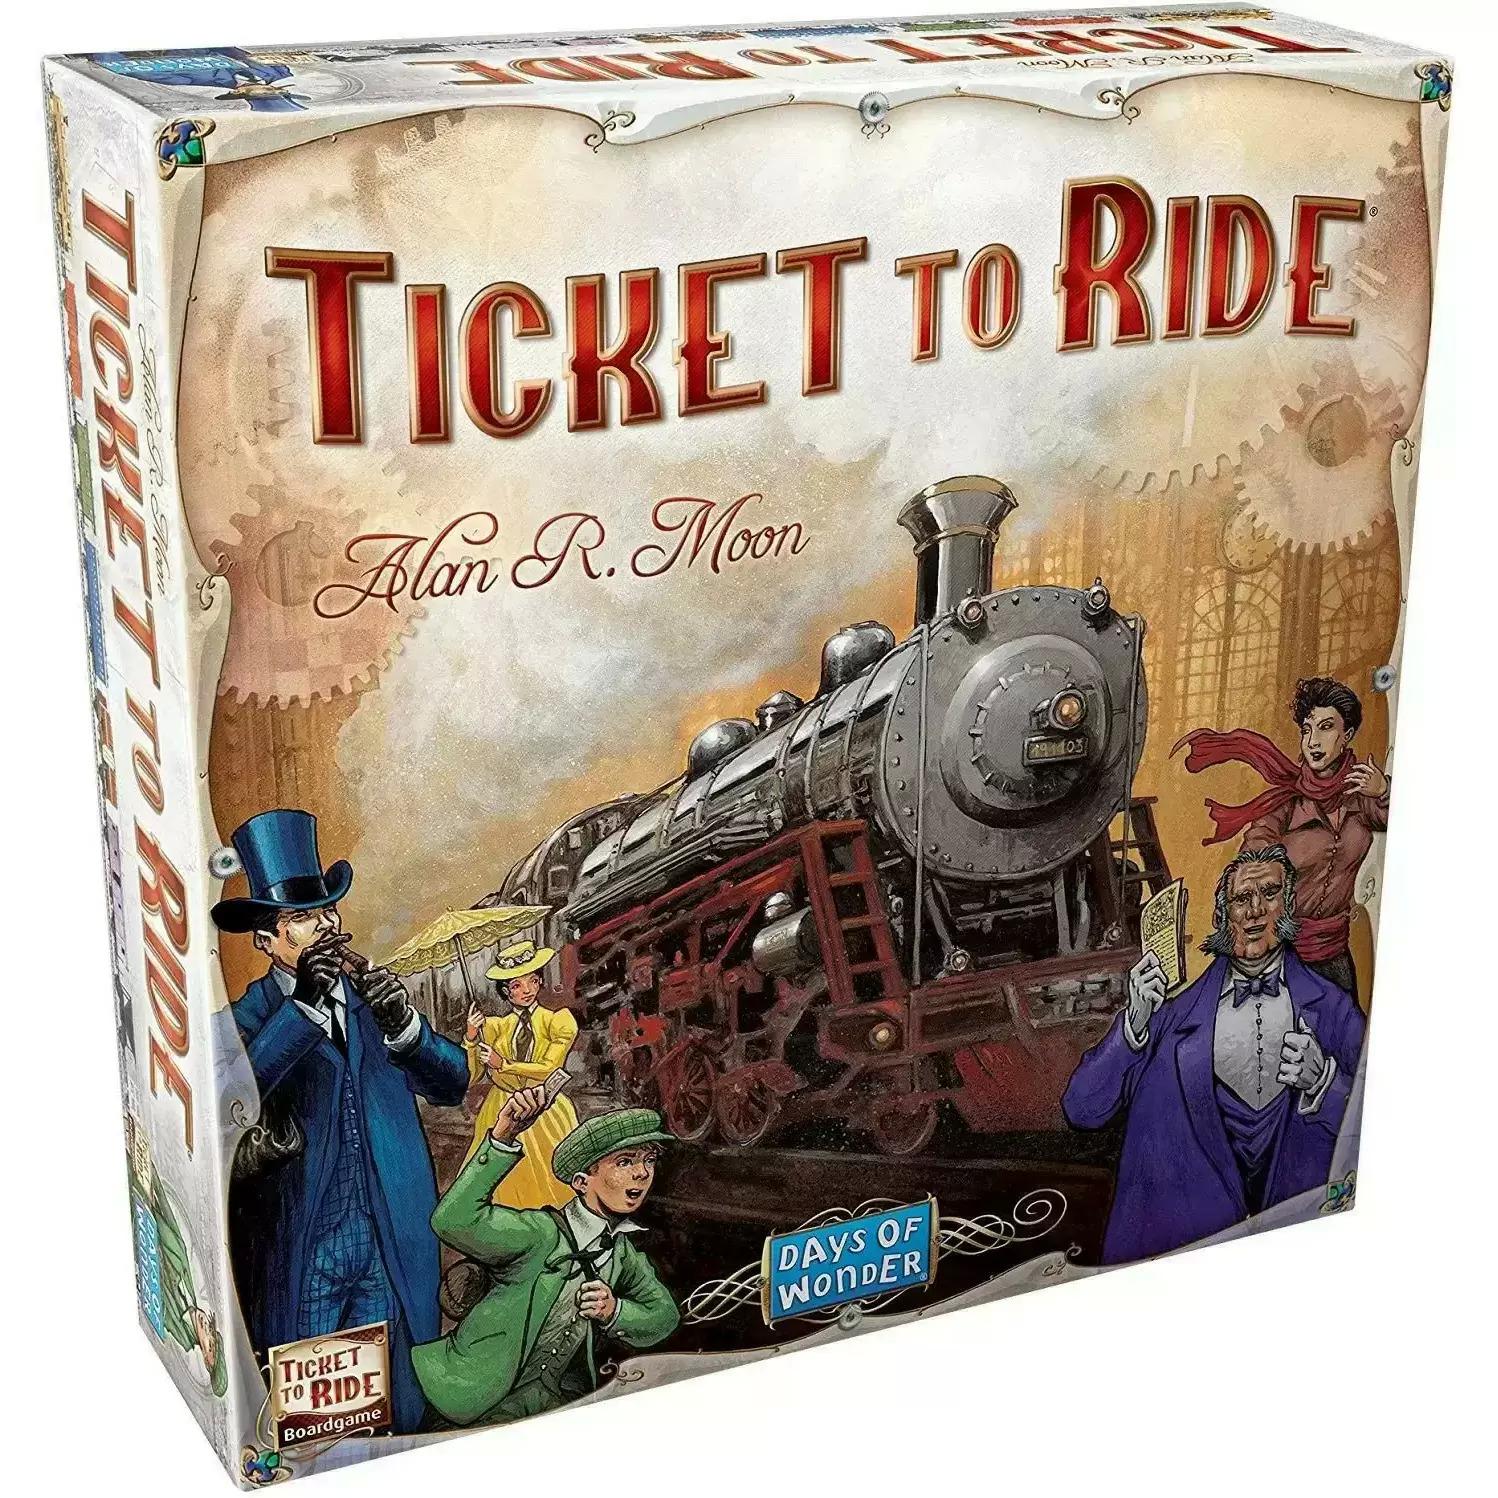 Ticket to Ride Board Game for $27.47 Shipped